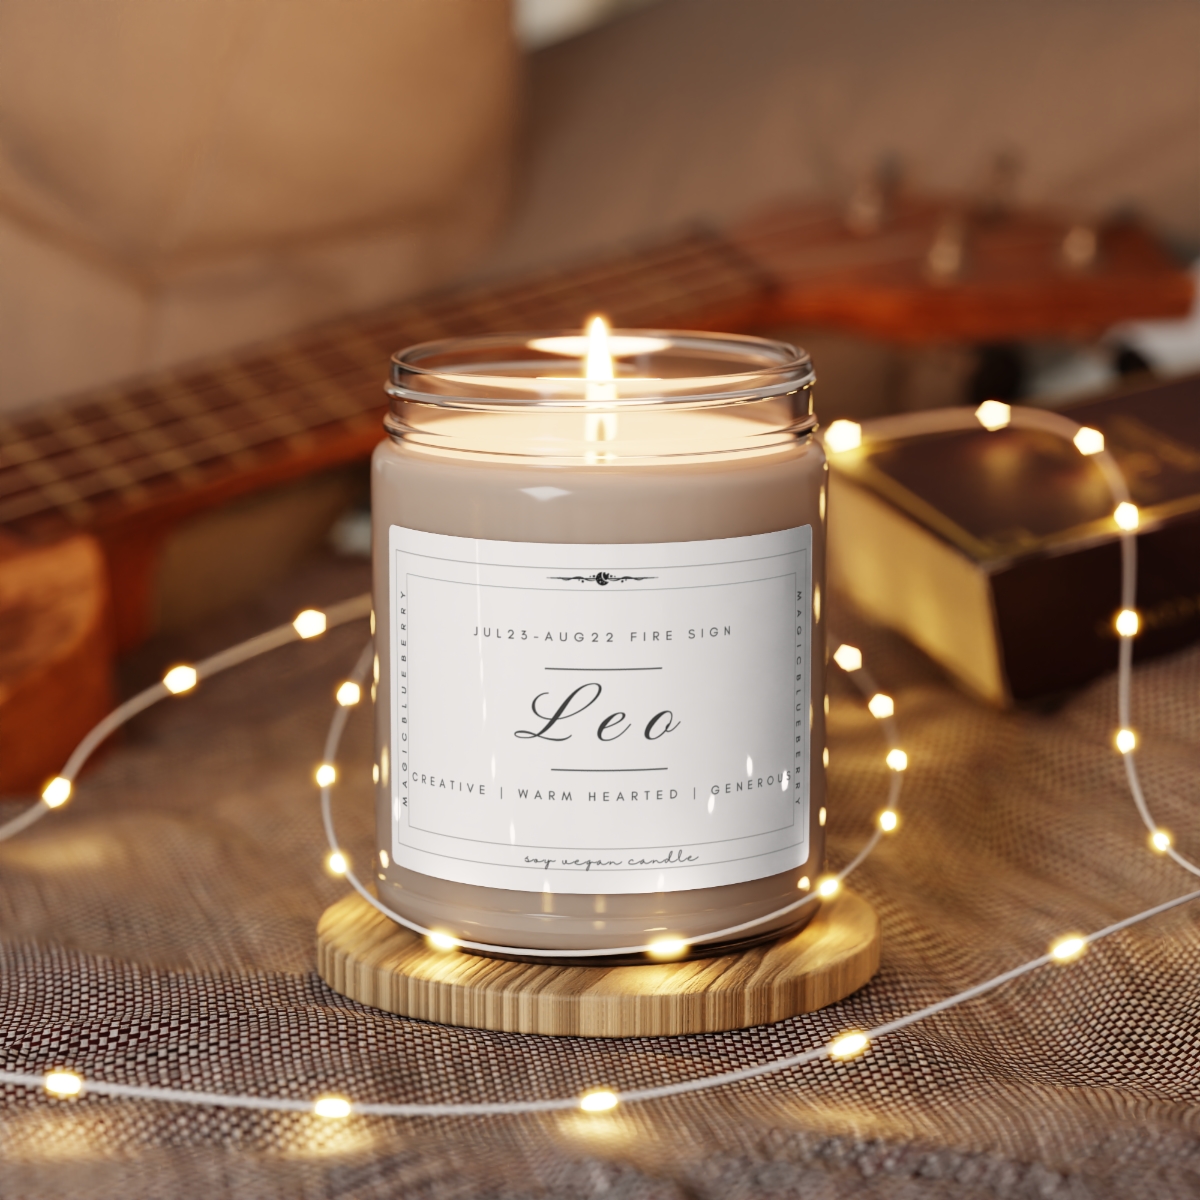 Leo - Scented Vegan Soy Wax Candle Clear Jar Candle, Spell Candle, Sassy Candle Vegan Candle Cotton Wick Candle Home Deco product thumbnail image